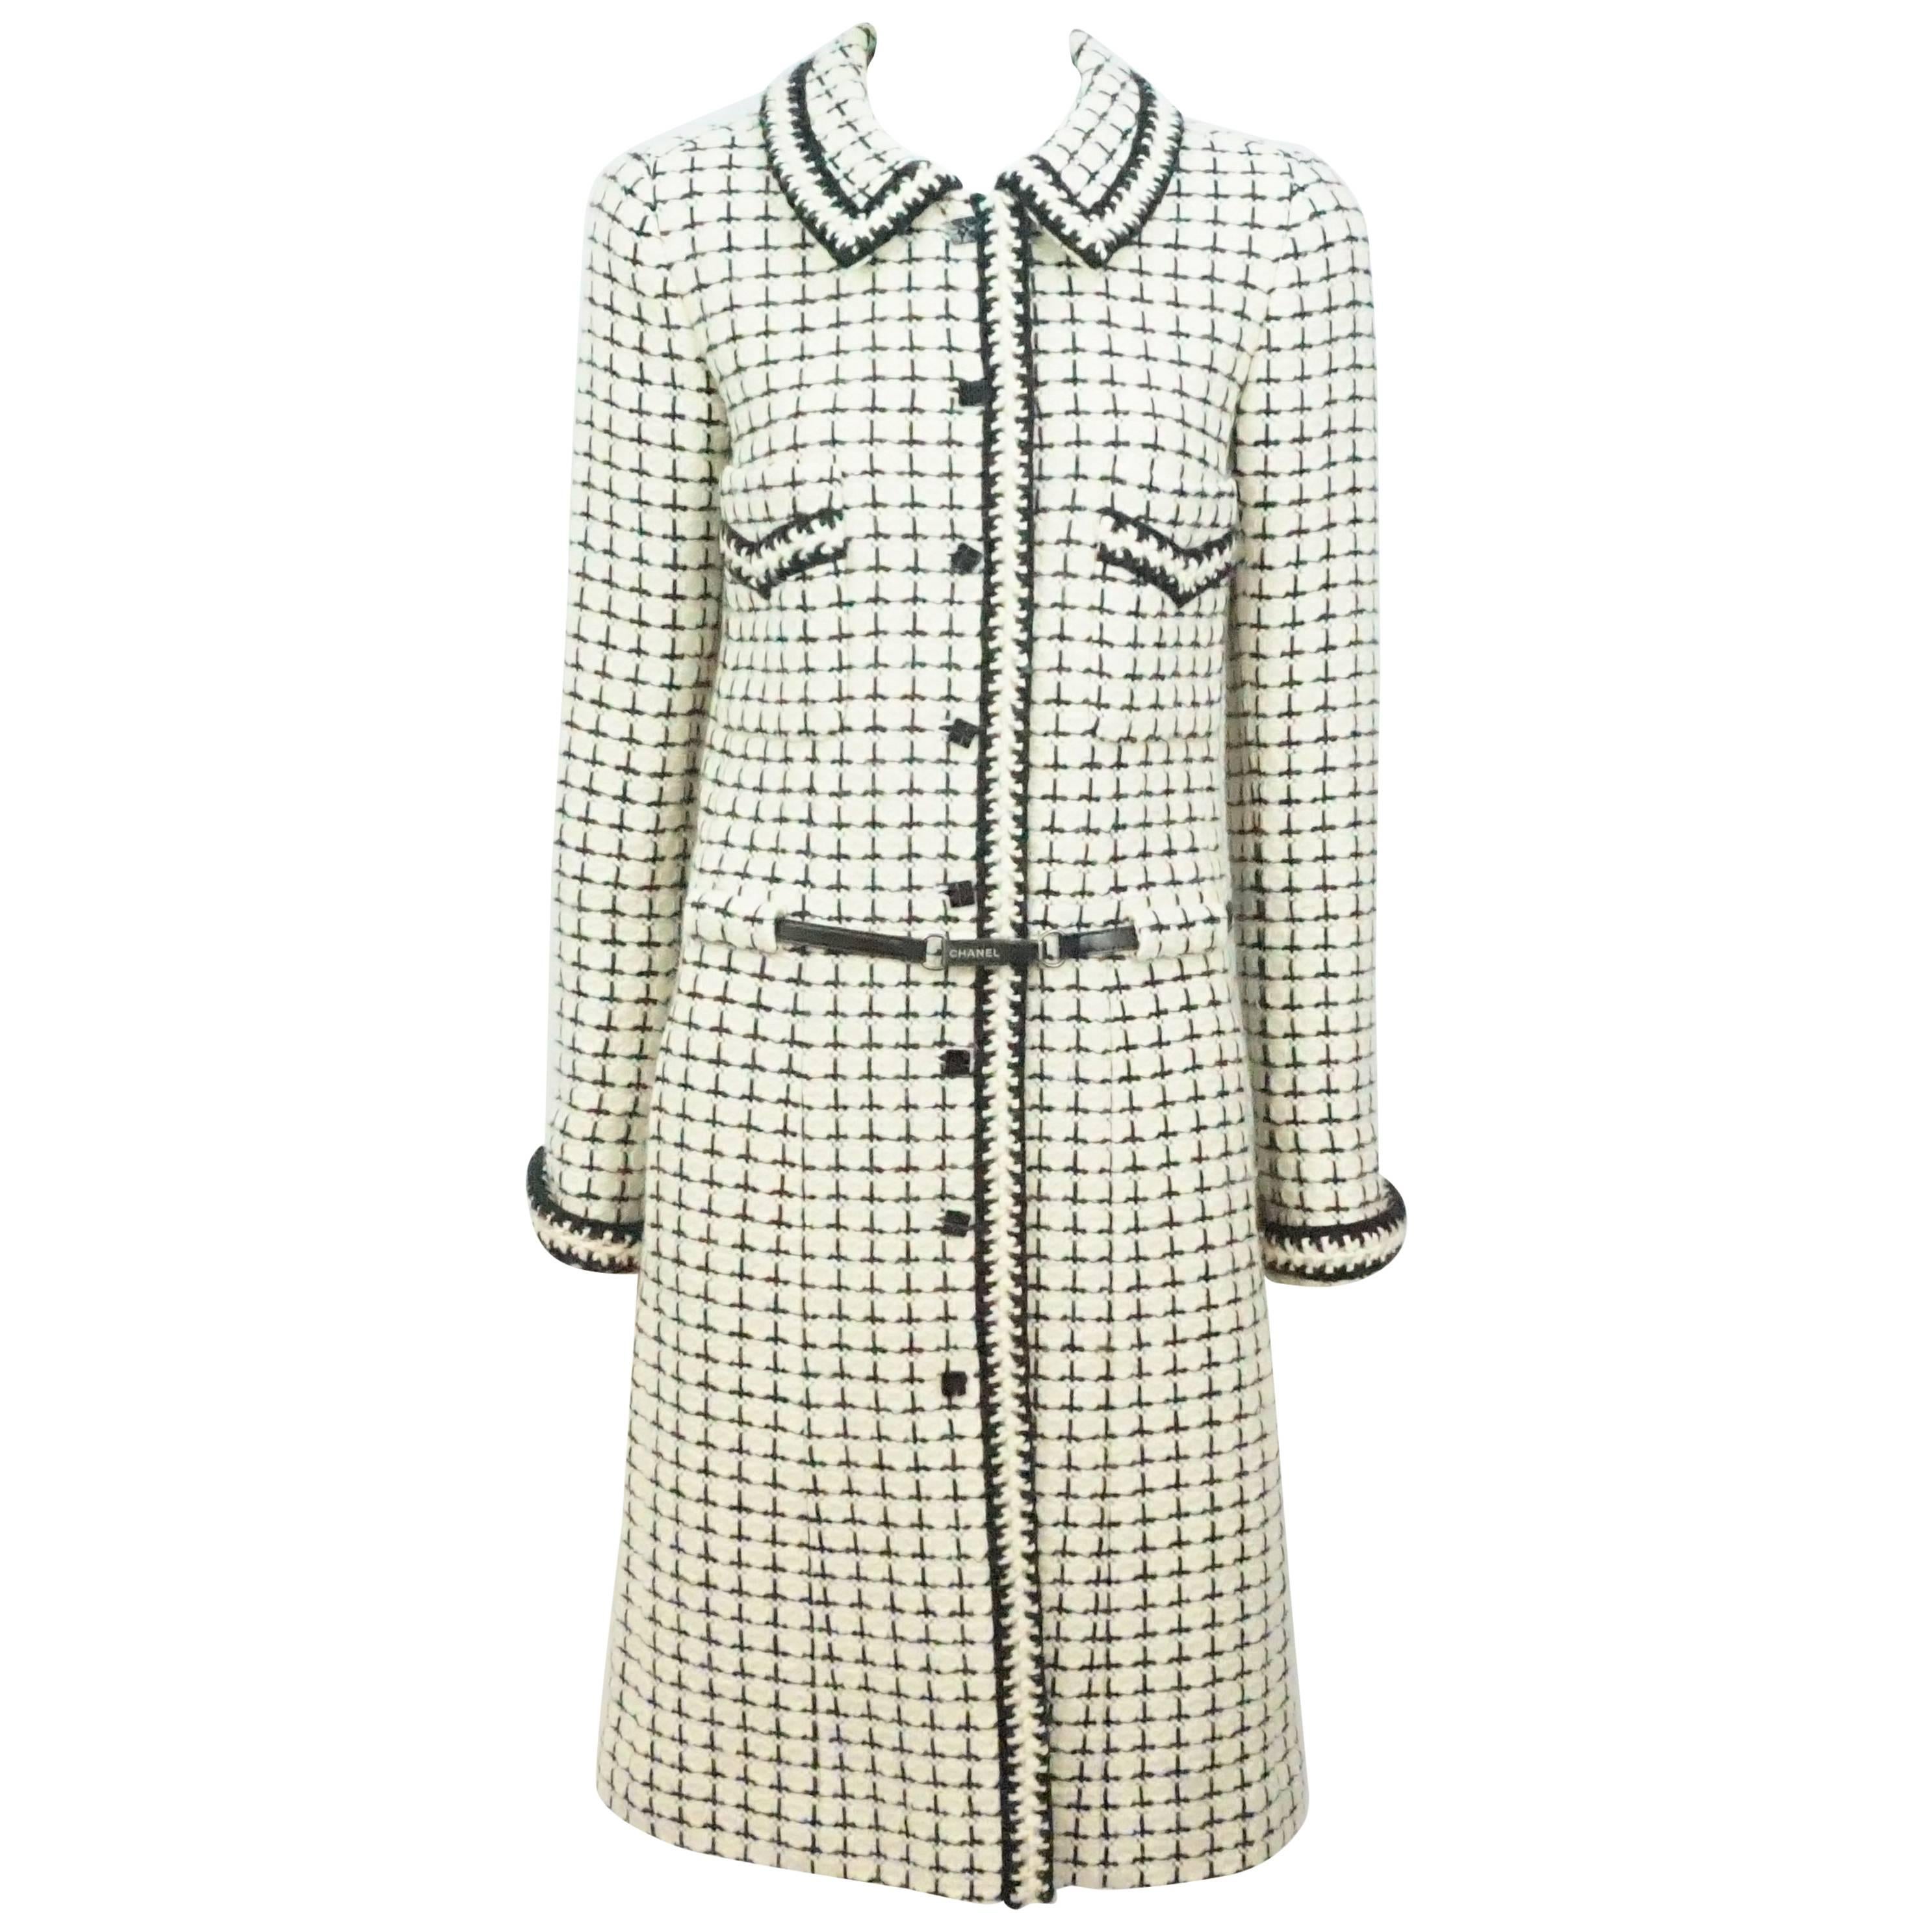 Chanel Ivory and Black Patterned Wool Tweed Coat/Dress with Belt - 36 - 00A